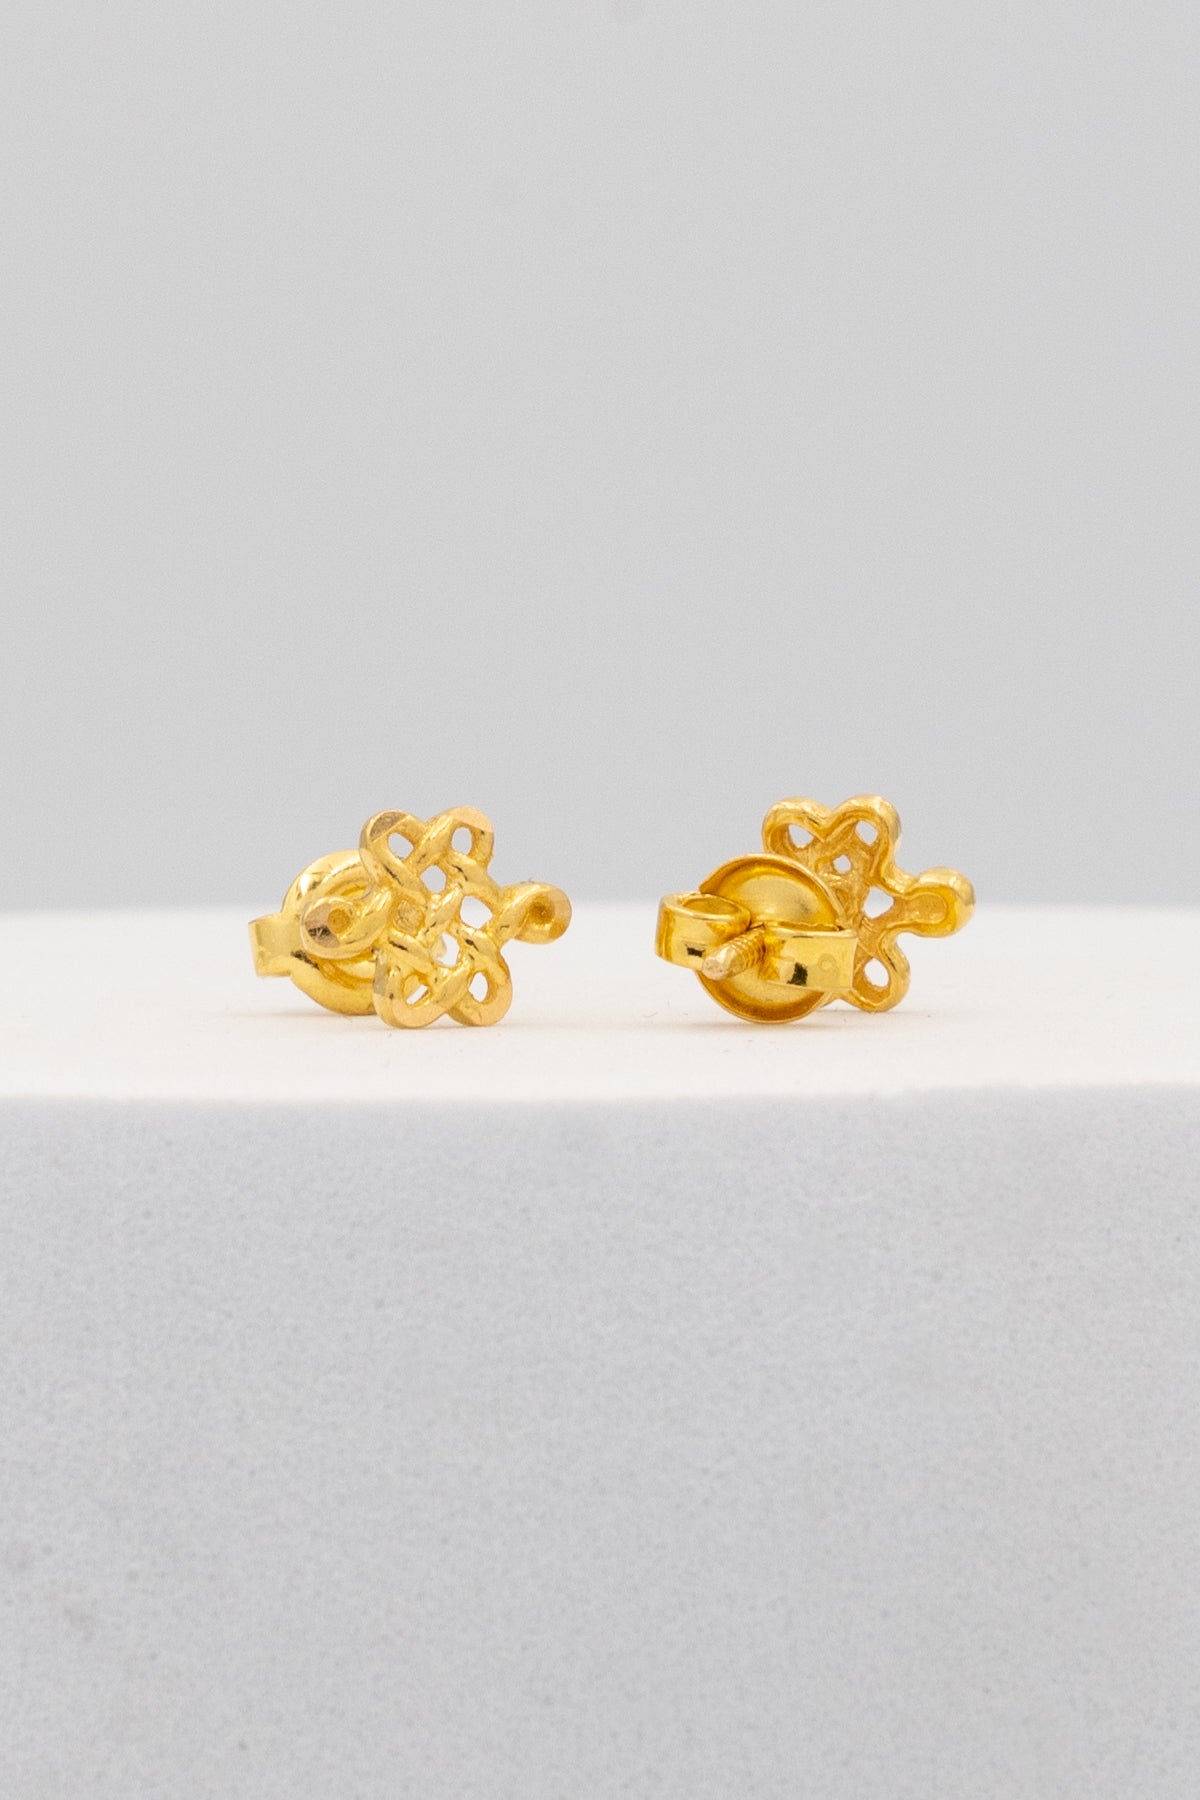 916 Gold abstract ear studs earrings for ladies